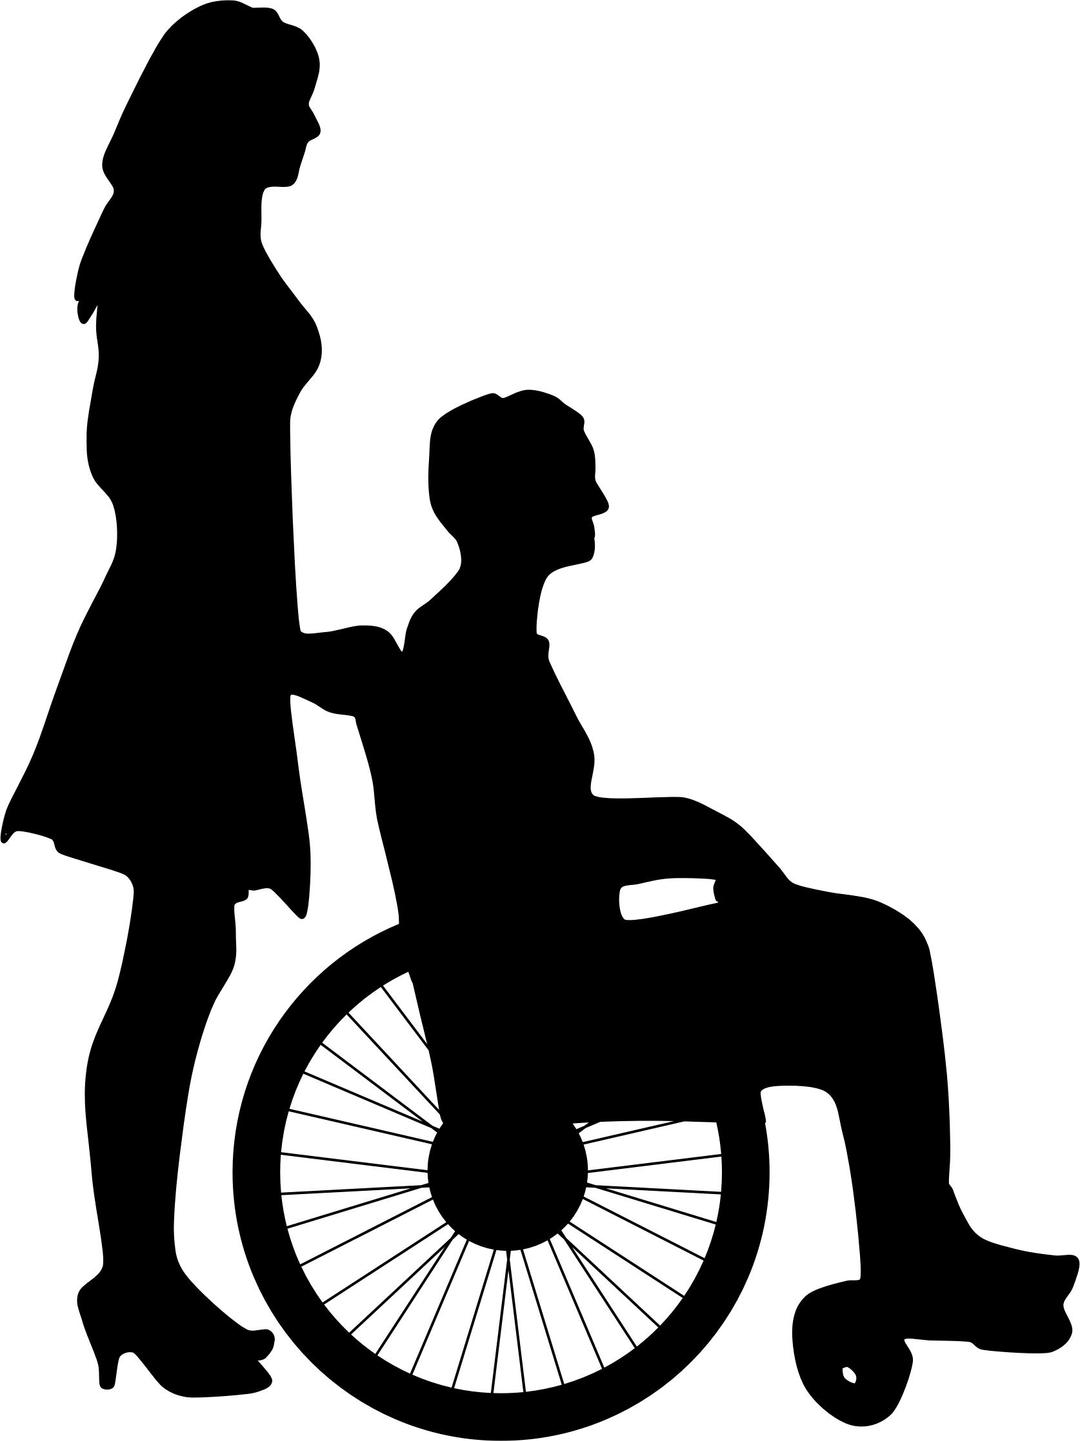 Woman Pushing Man In Wheelchair Silhouette png transparent